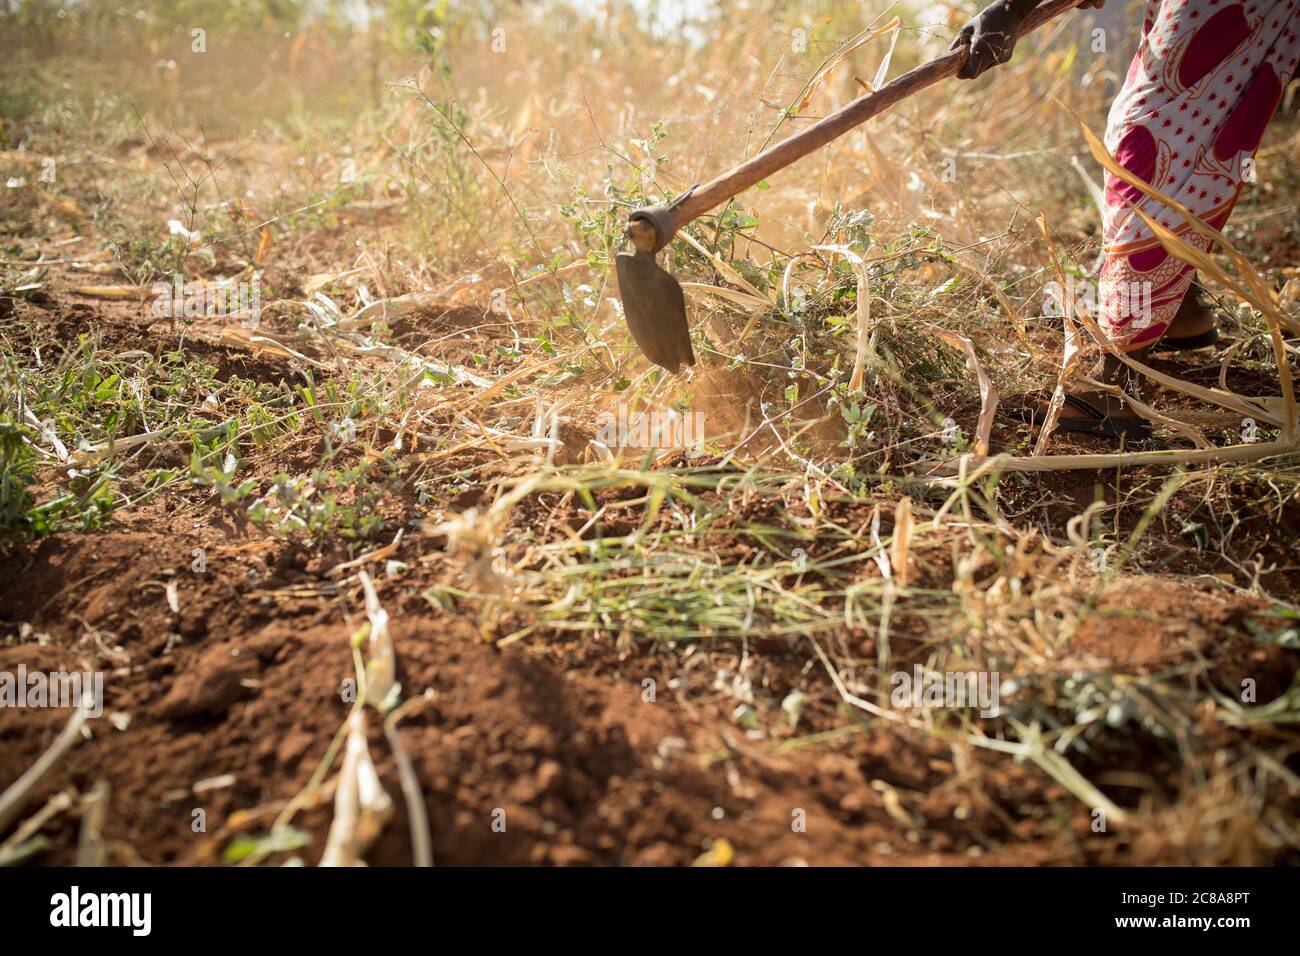 A woman works on her drought-stricken maize farm in Makueni County, Kenya, East Africa. Stock Photo